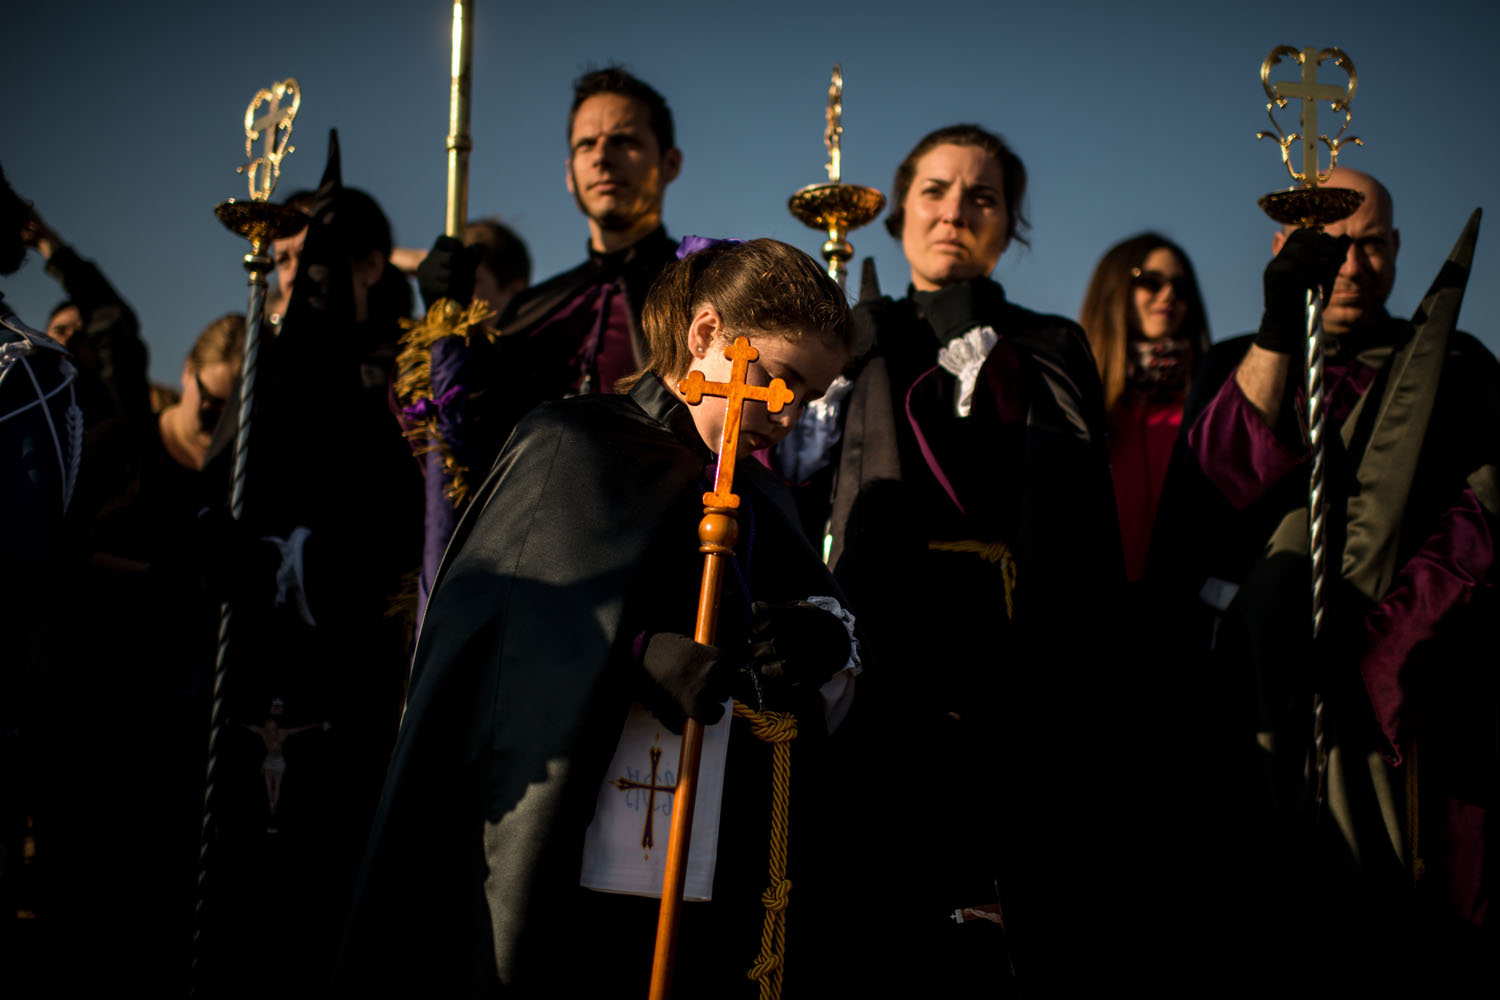 Apr. 18, 2014.  Worshipers of the 'Santisimo Cristo del Salvador' brotherhood pray around the crucifix on the beach during a holy week procession in Valencia, Spain. Spain celebrates holy week before Easter with processions in most Spanish towns.